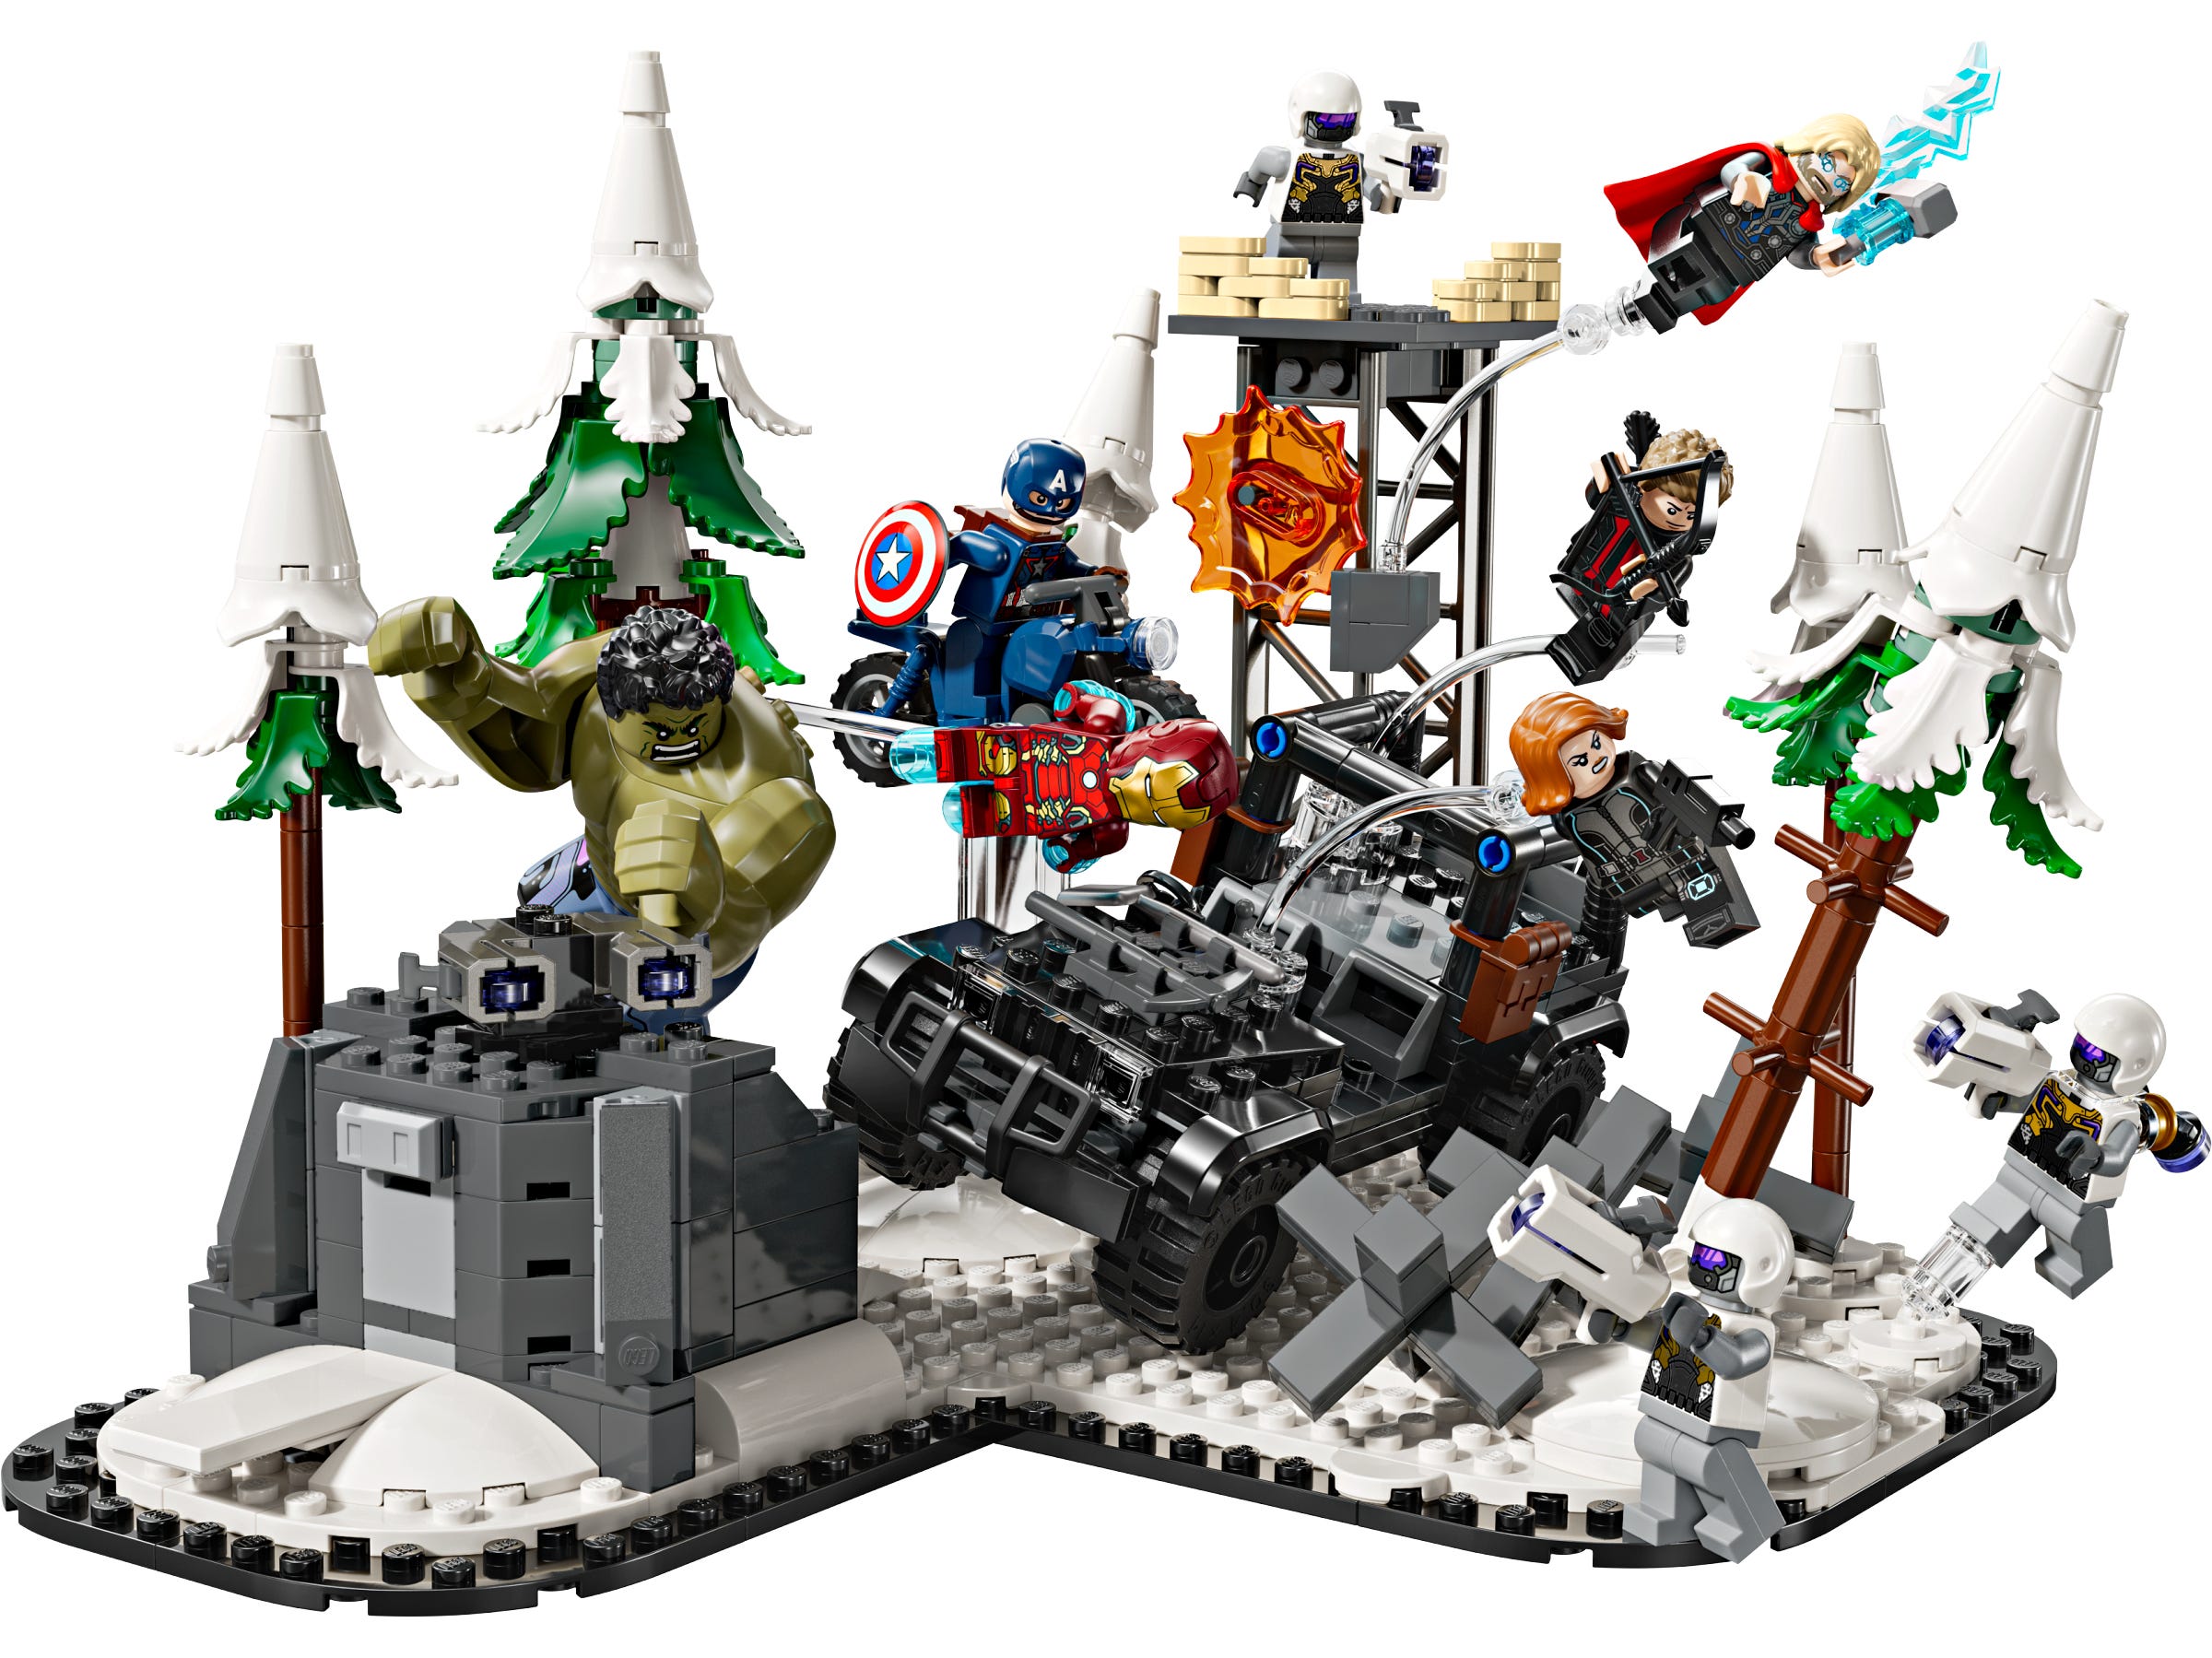 LEGO The Avengers Assemble: Age of Ultron